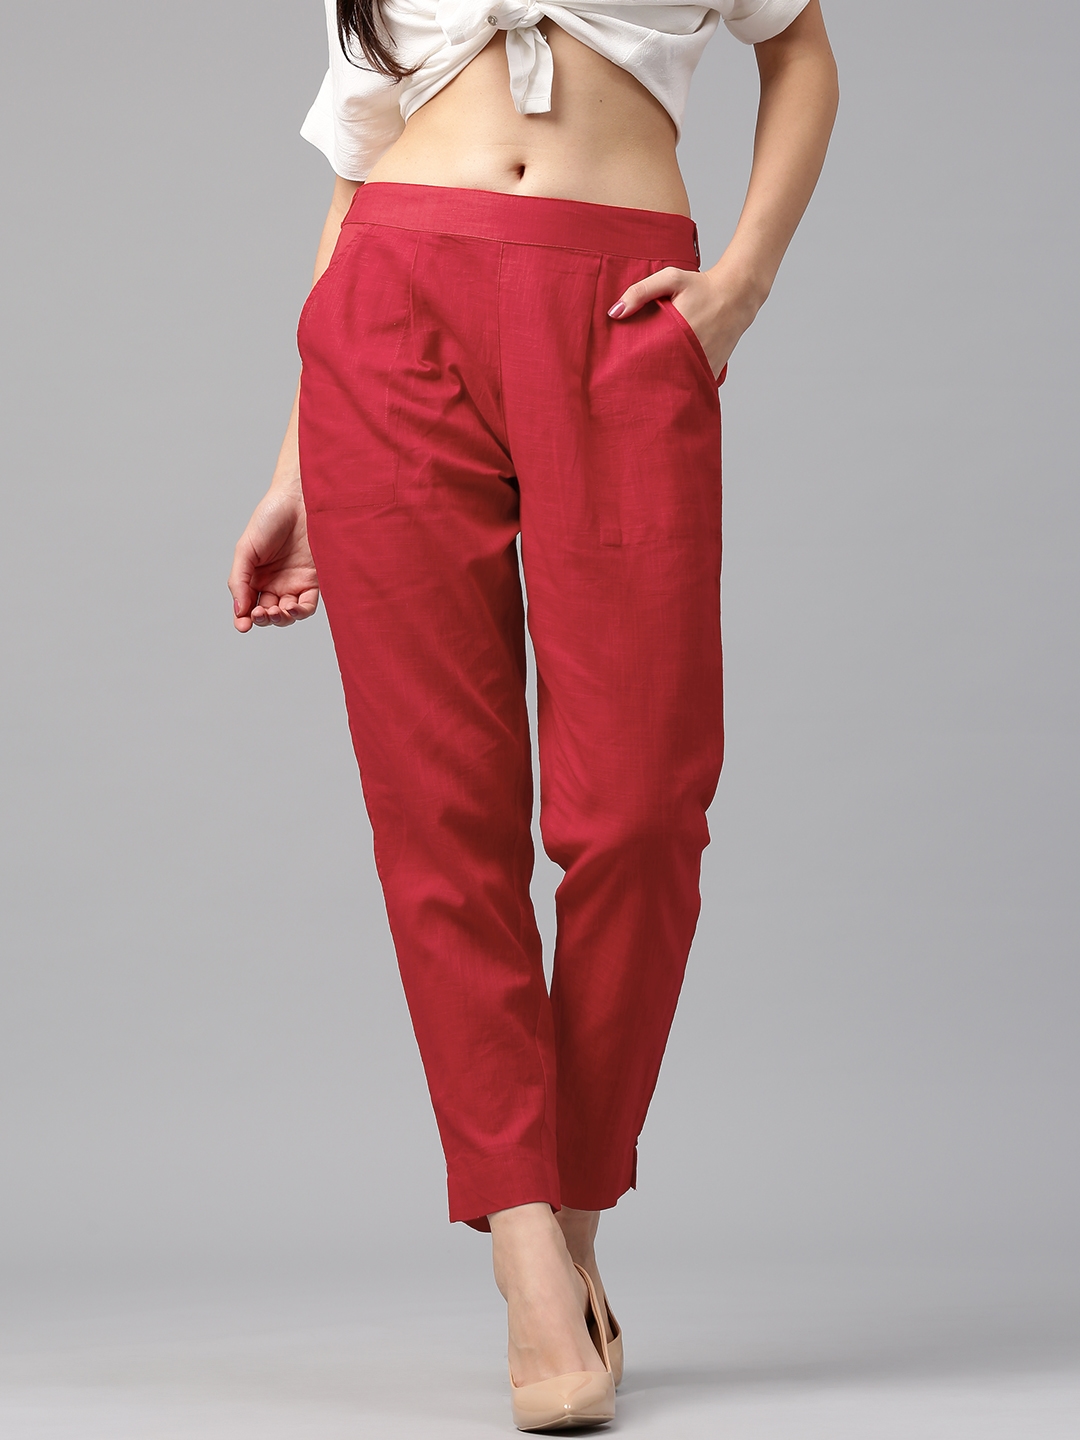 Flounce London basic high waisted wide leg trousers in red | ASOS-as247.edu.vn